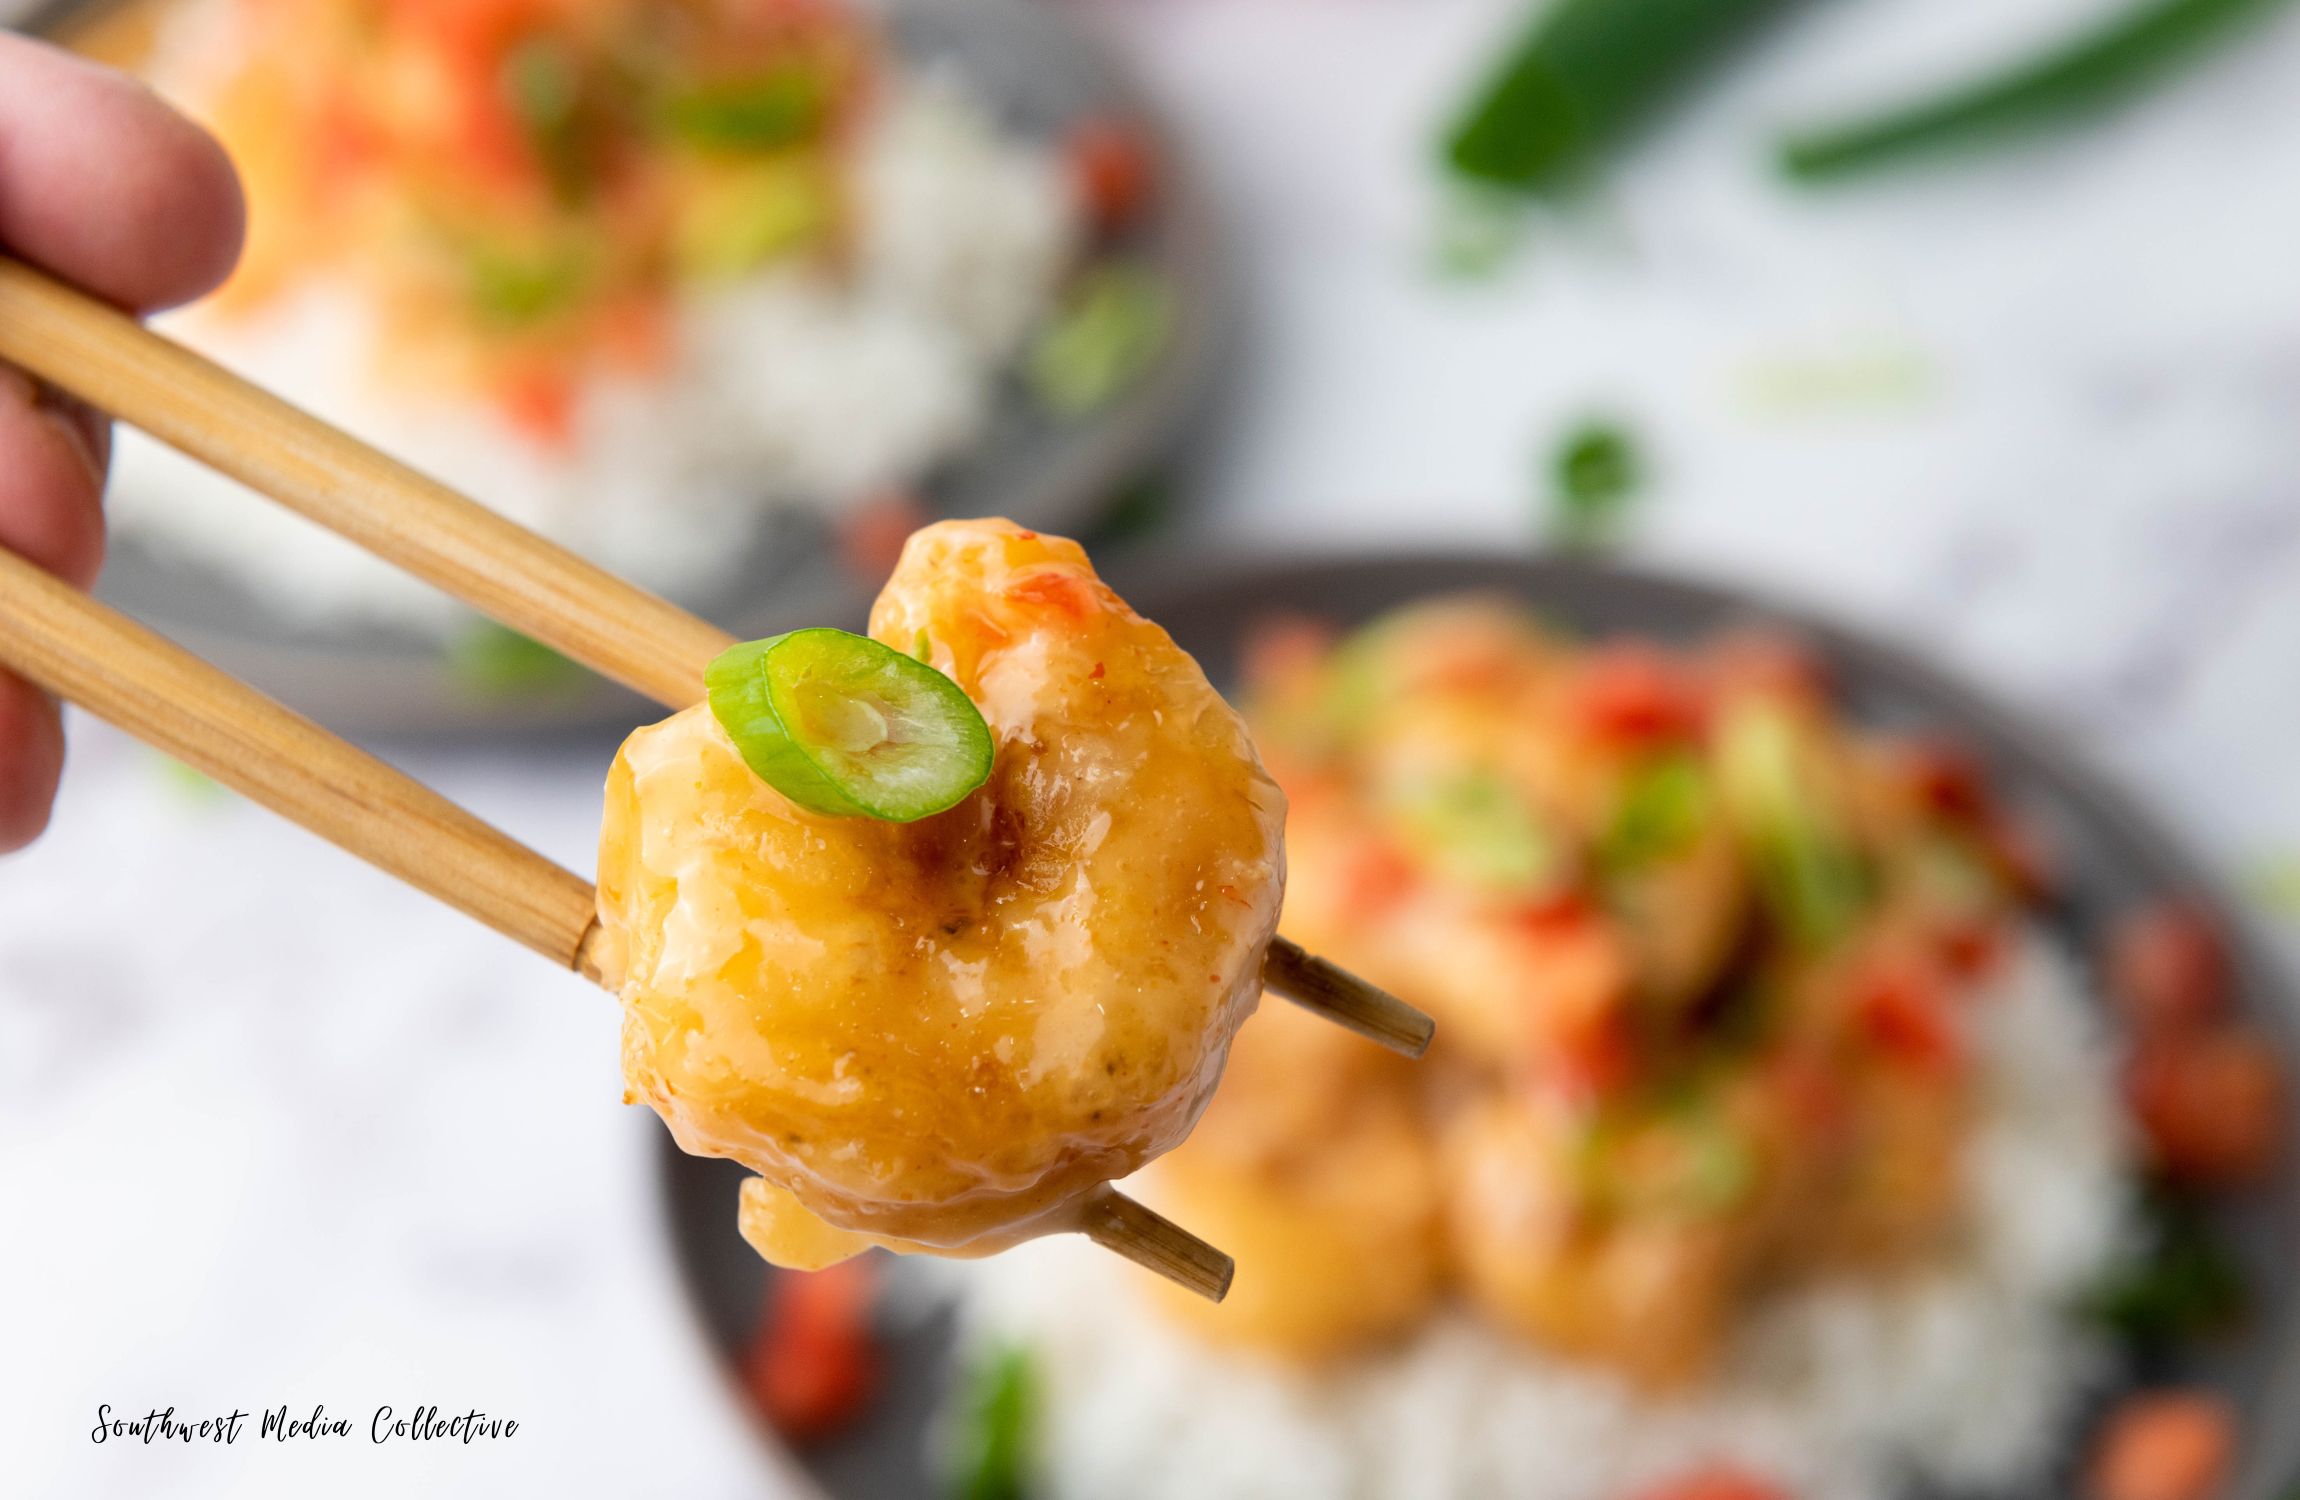 Easy Bang Bang Shrimp made in the comfort of your own home!  Simple ingredients come together quickly to create a meal that everyone will love!